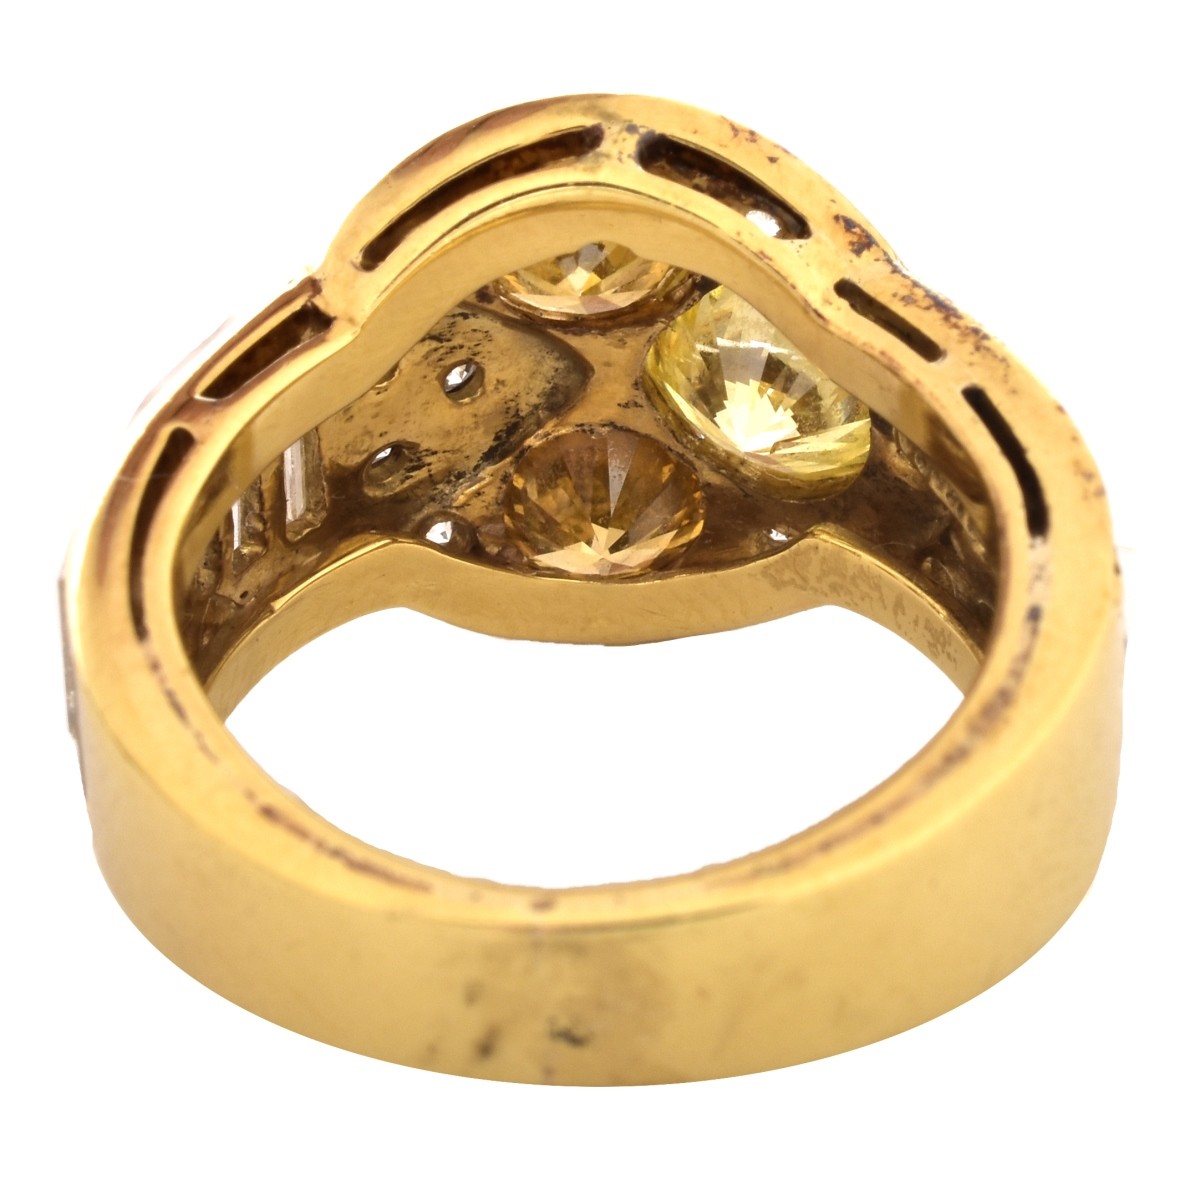 Moba 3.22ct TW Diamond and 18K Gold Ring